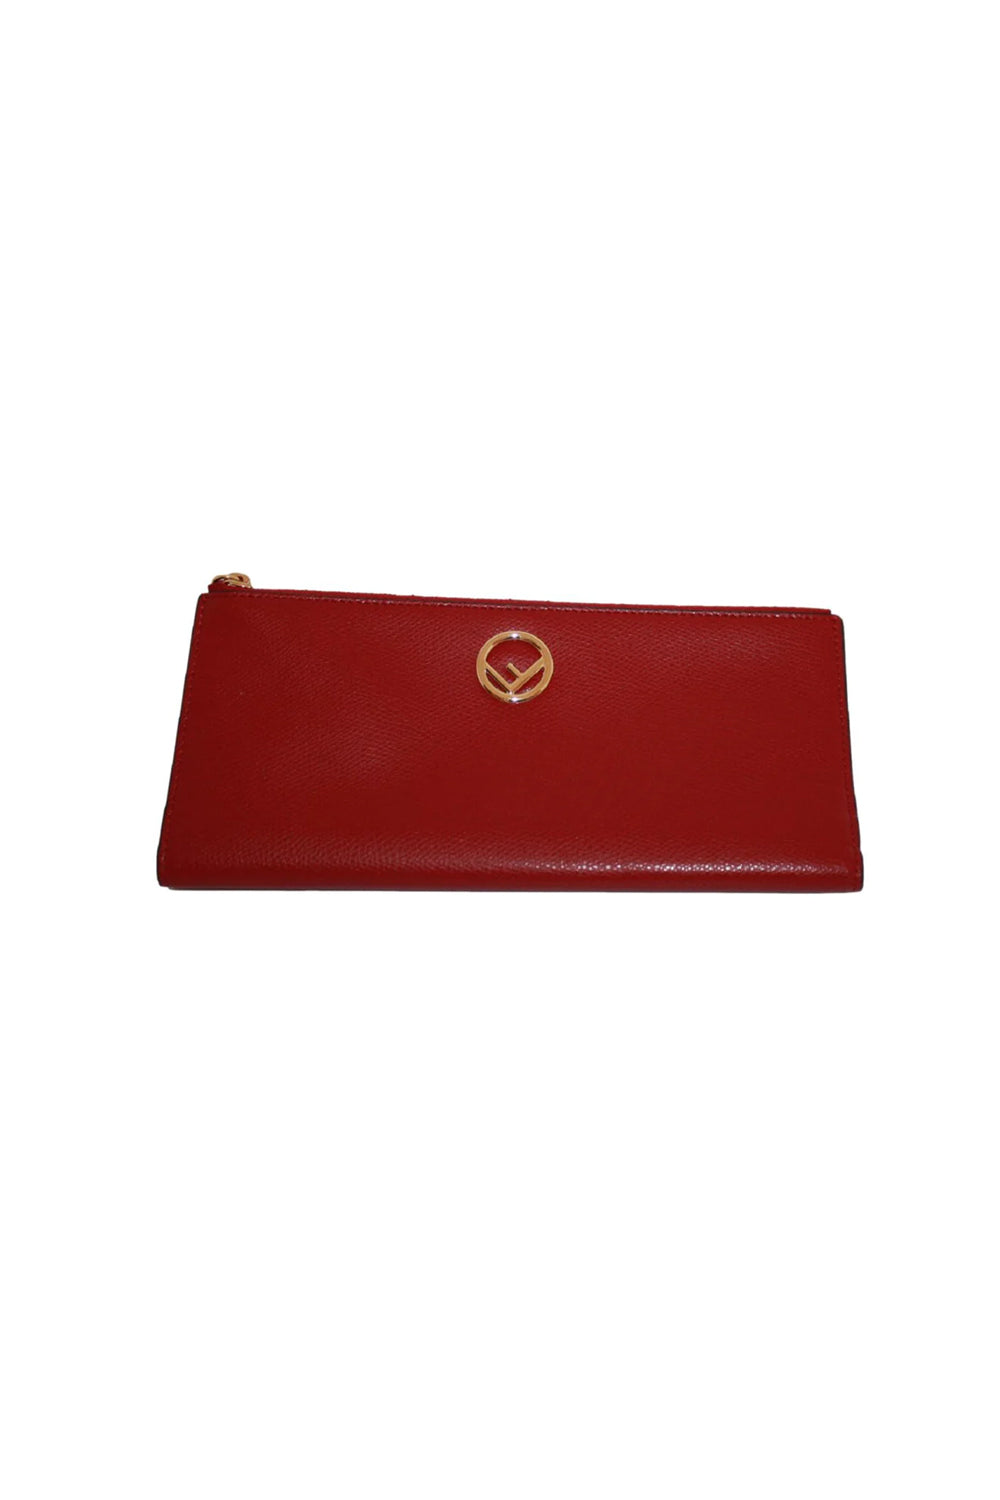 Fendi F Calf Leather Double Zip Long Wallet - Red